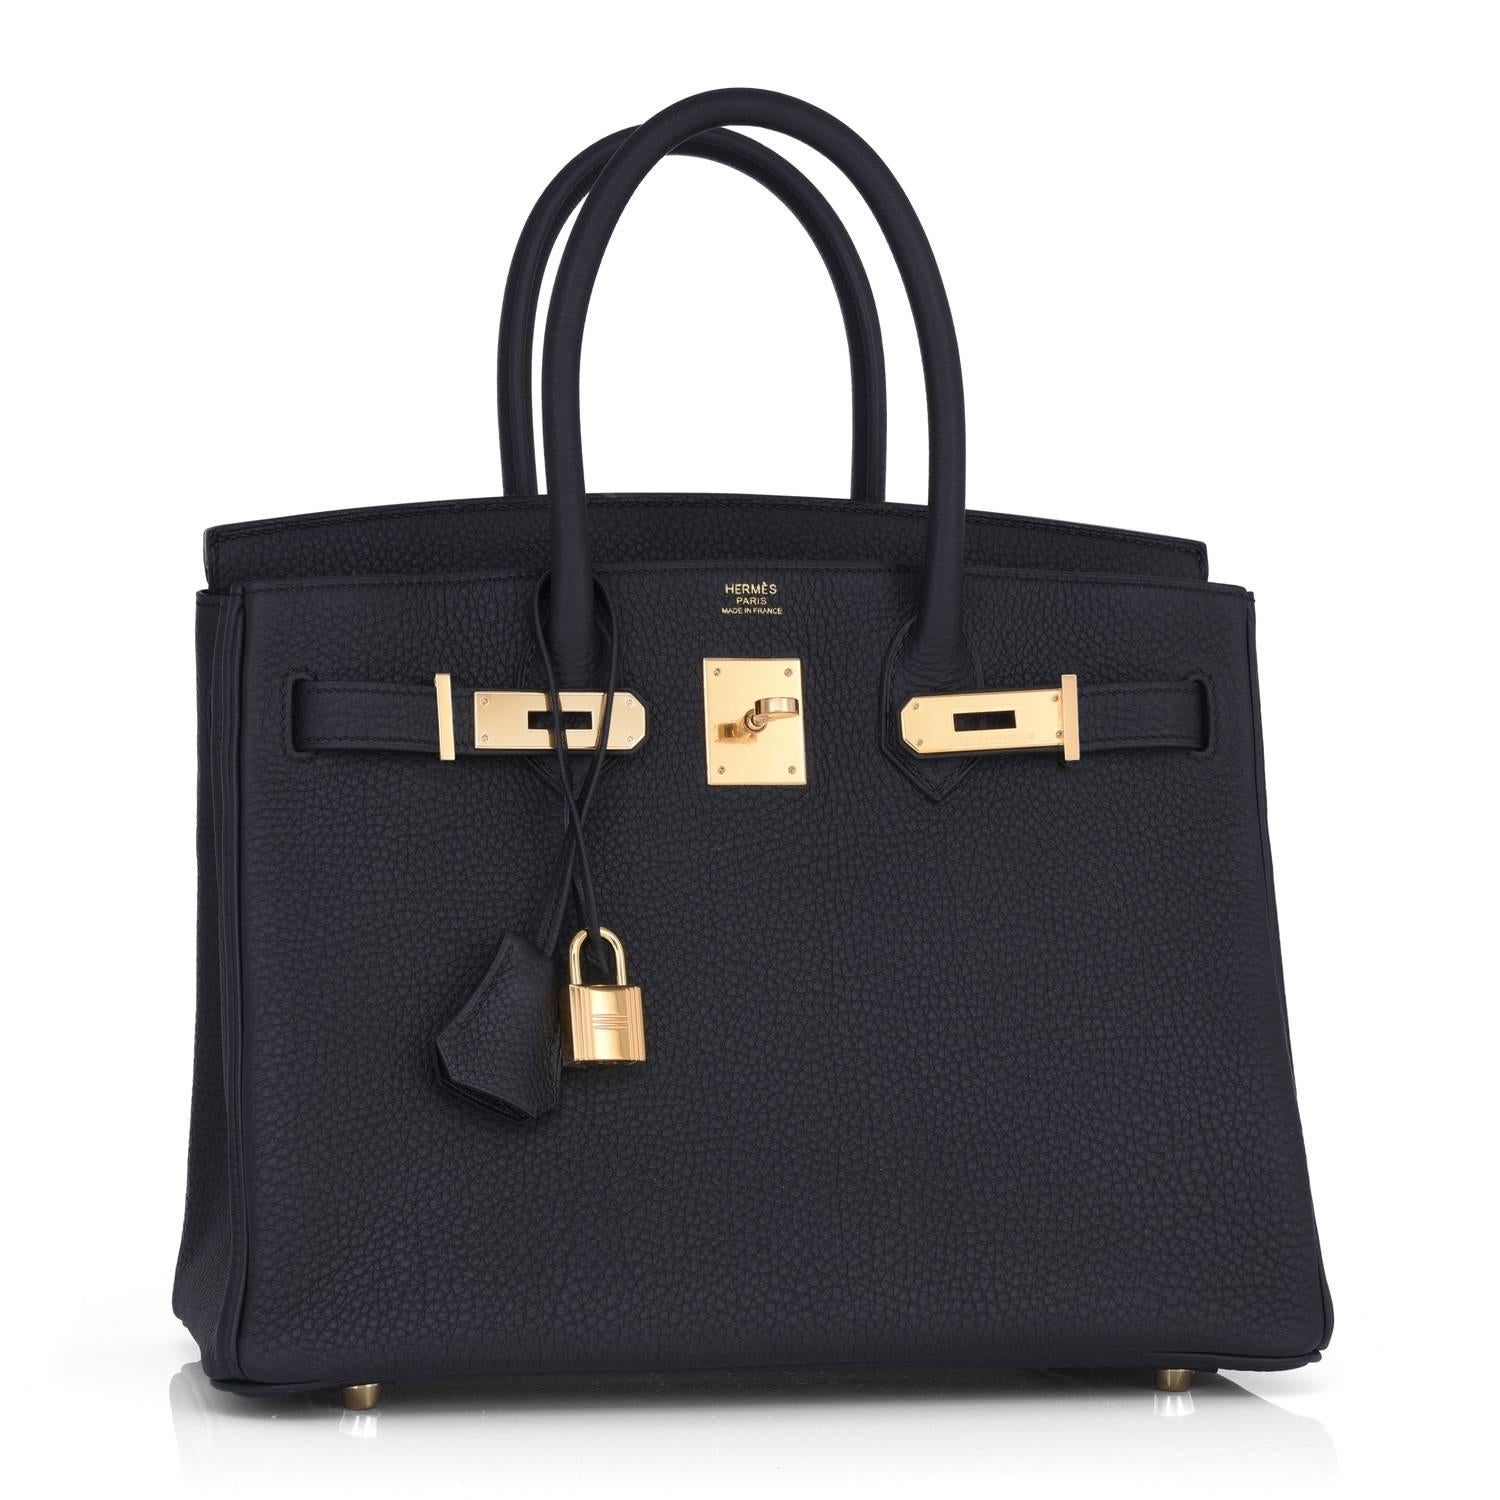 Hermes Black 30cm Birkin Togo Gold Hardware Classic Chic
Brand New in Box. Store Fresh. Pristine condition (with plastic on hardware).
Just purchased from store; bag bears new interior X stamp.
Perfect gift! Comes full set with keys, lock,